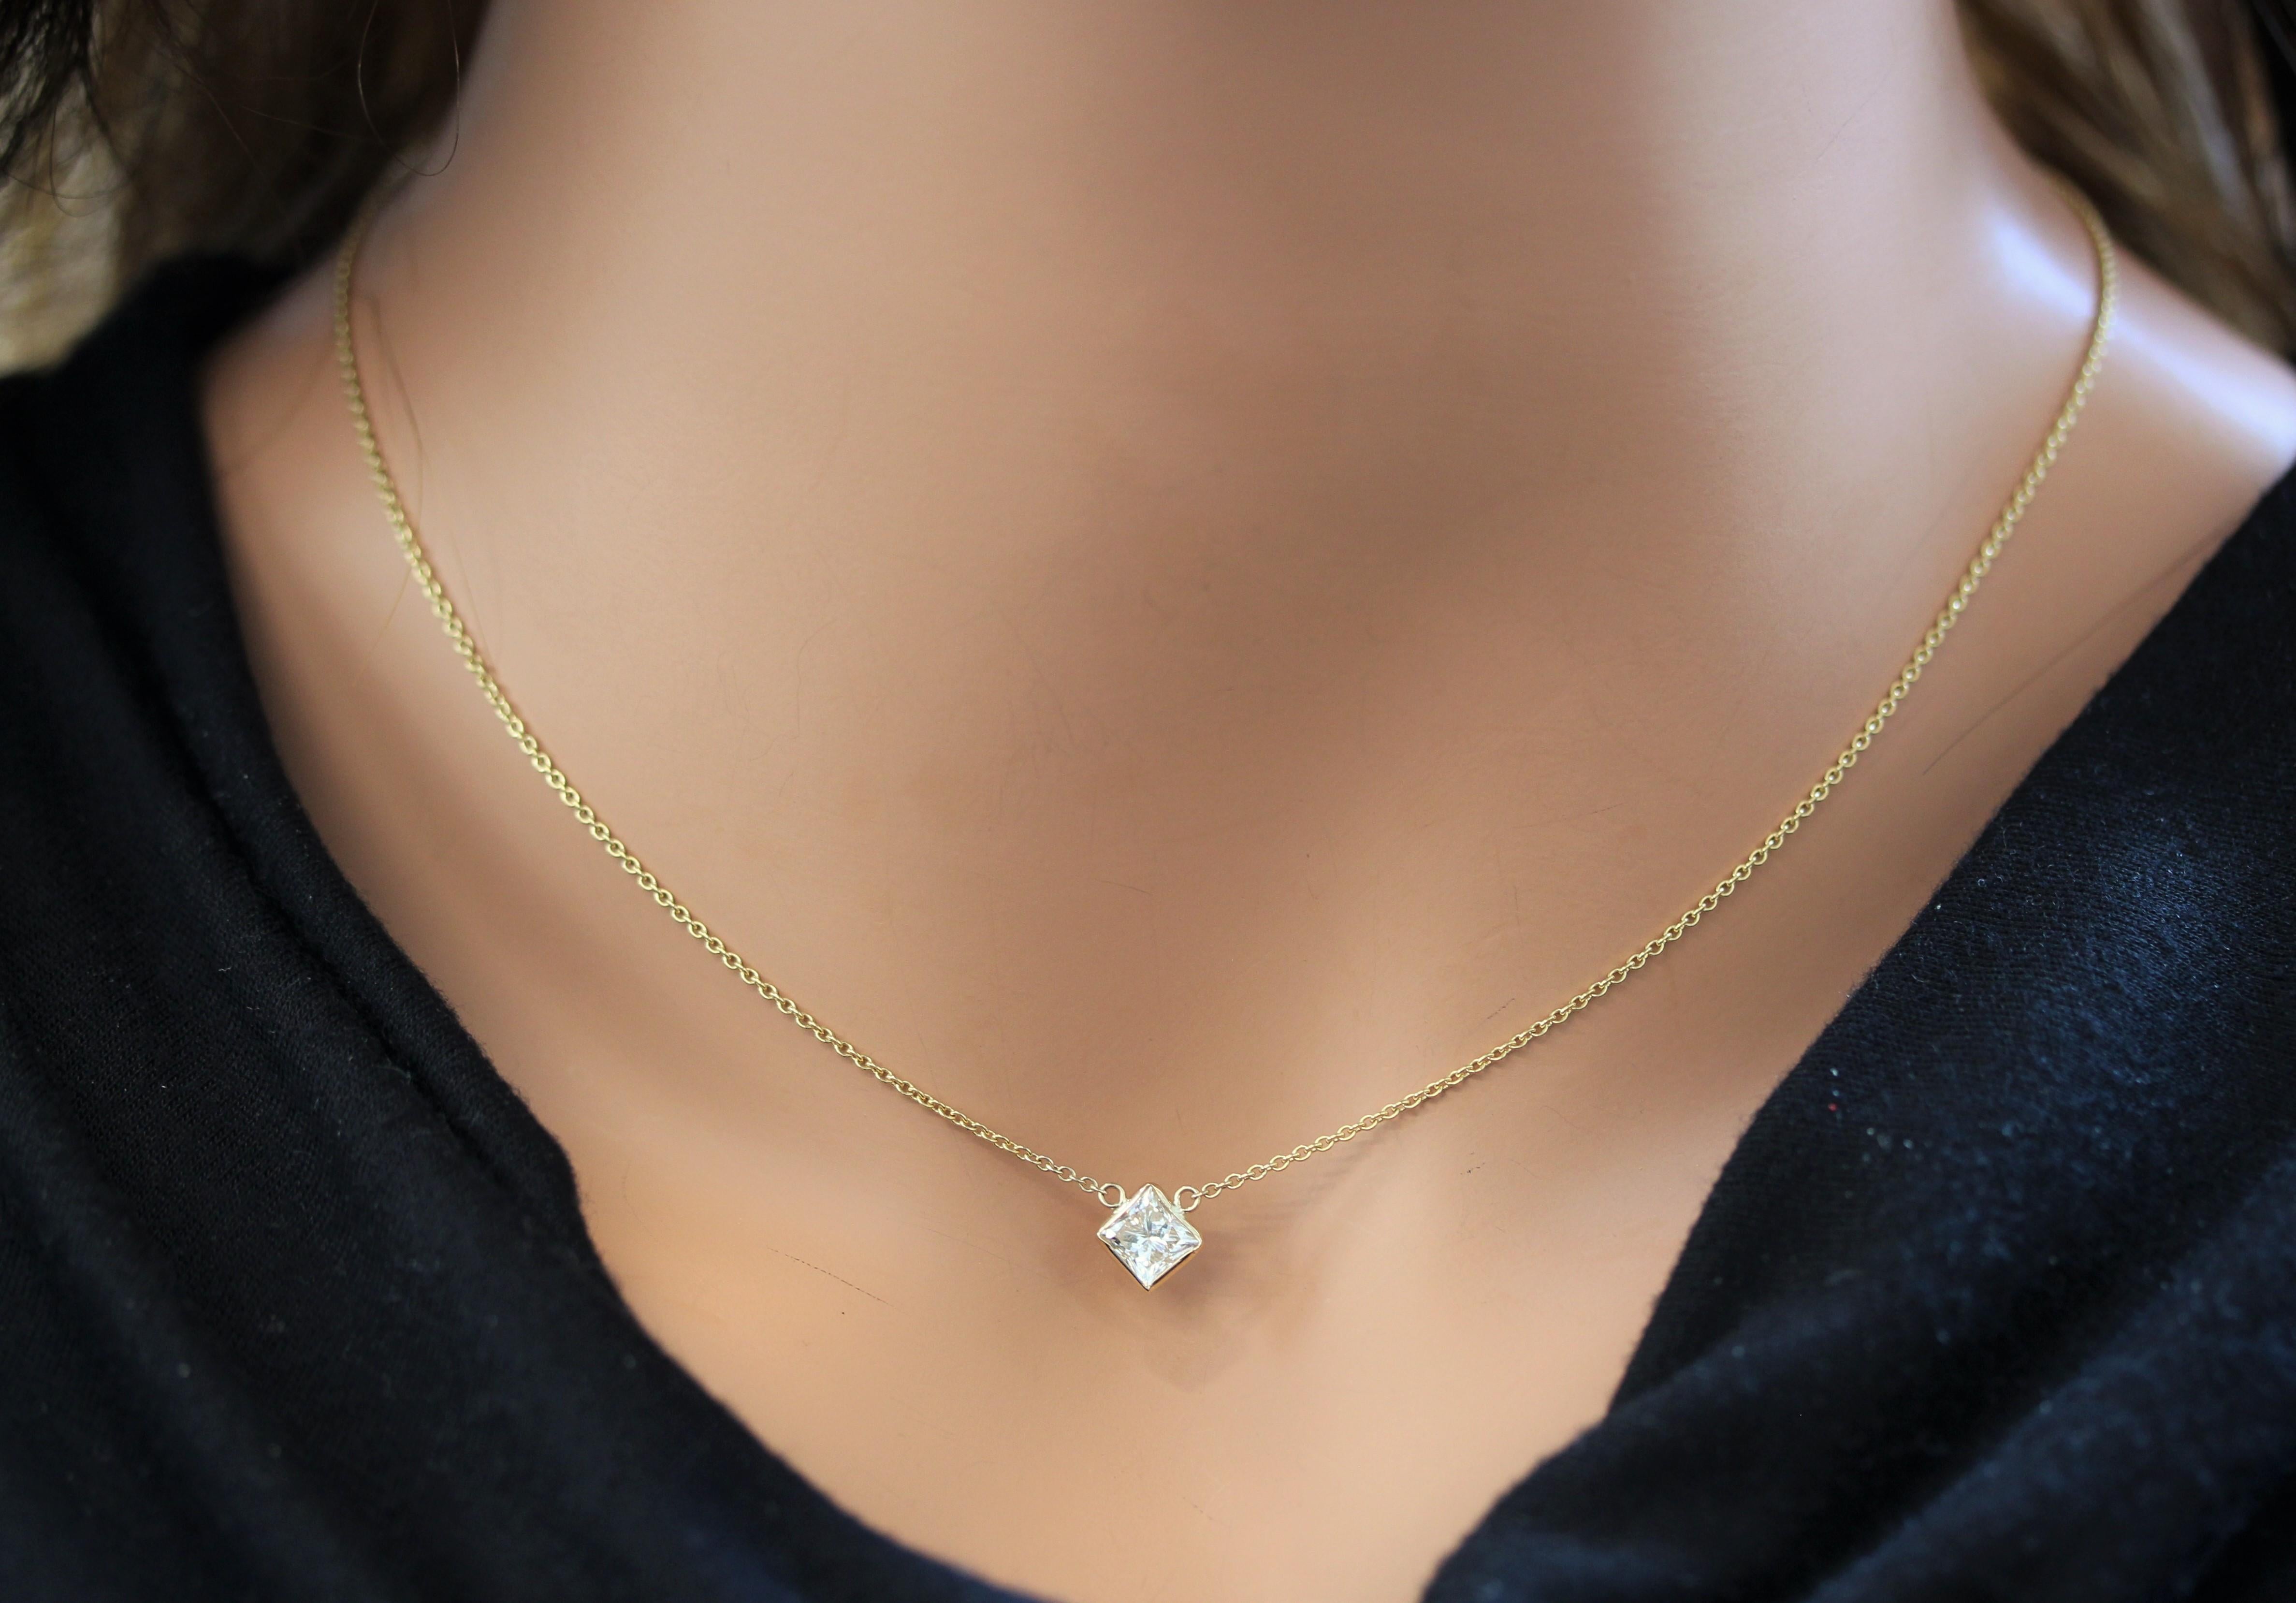 Make a statement worn solo and level up your collar candy when layered. How would you wear it? This is a natural Princess, color SI2 and clarity J, handmade necklace wire-wrapped in 14k  yellow gold. This is a piece you'll wear forever. We made them